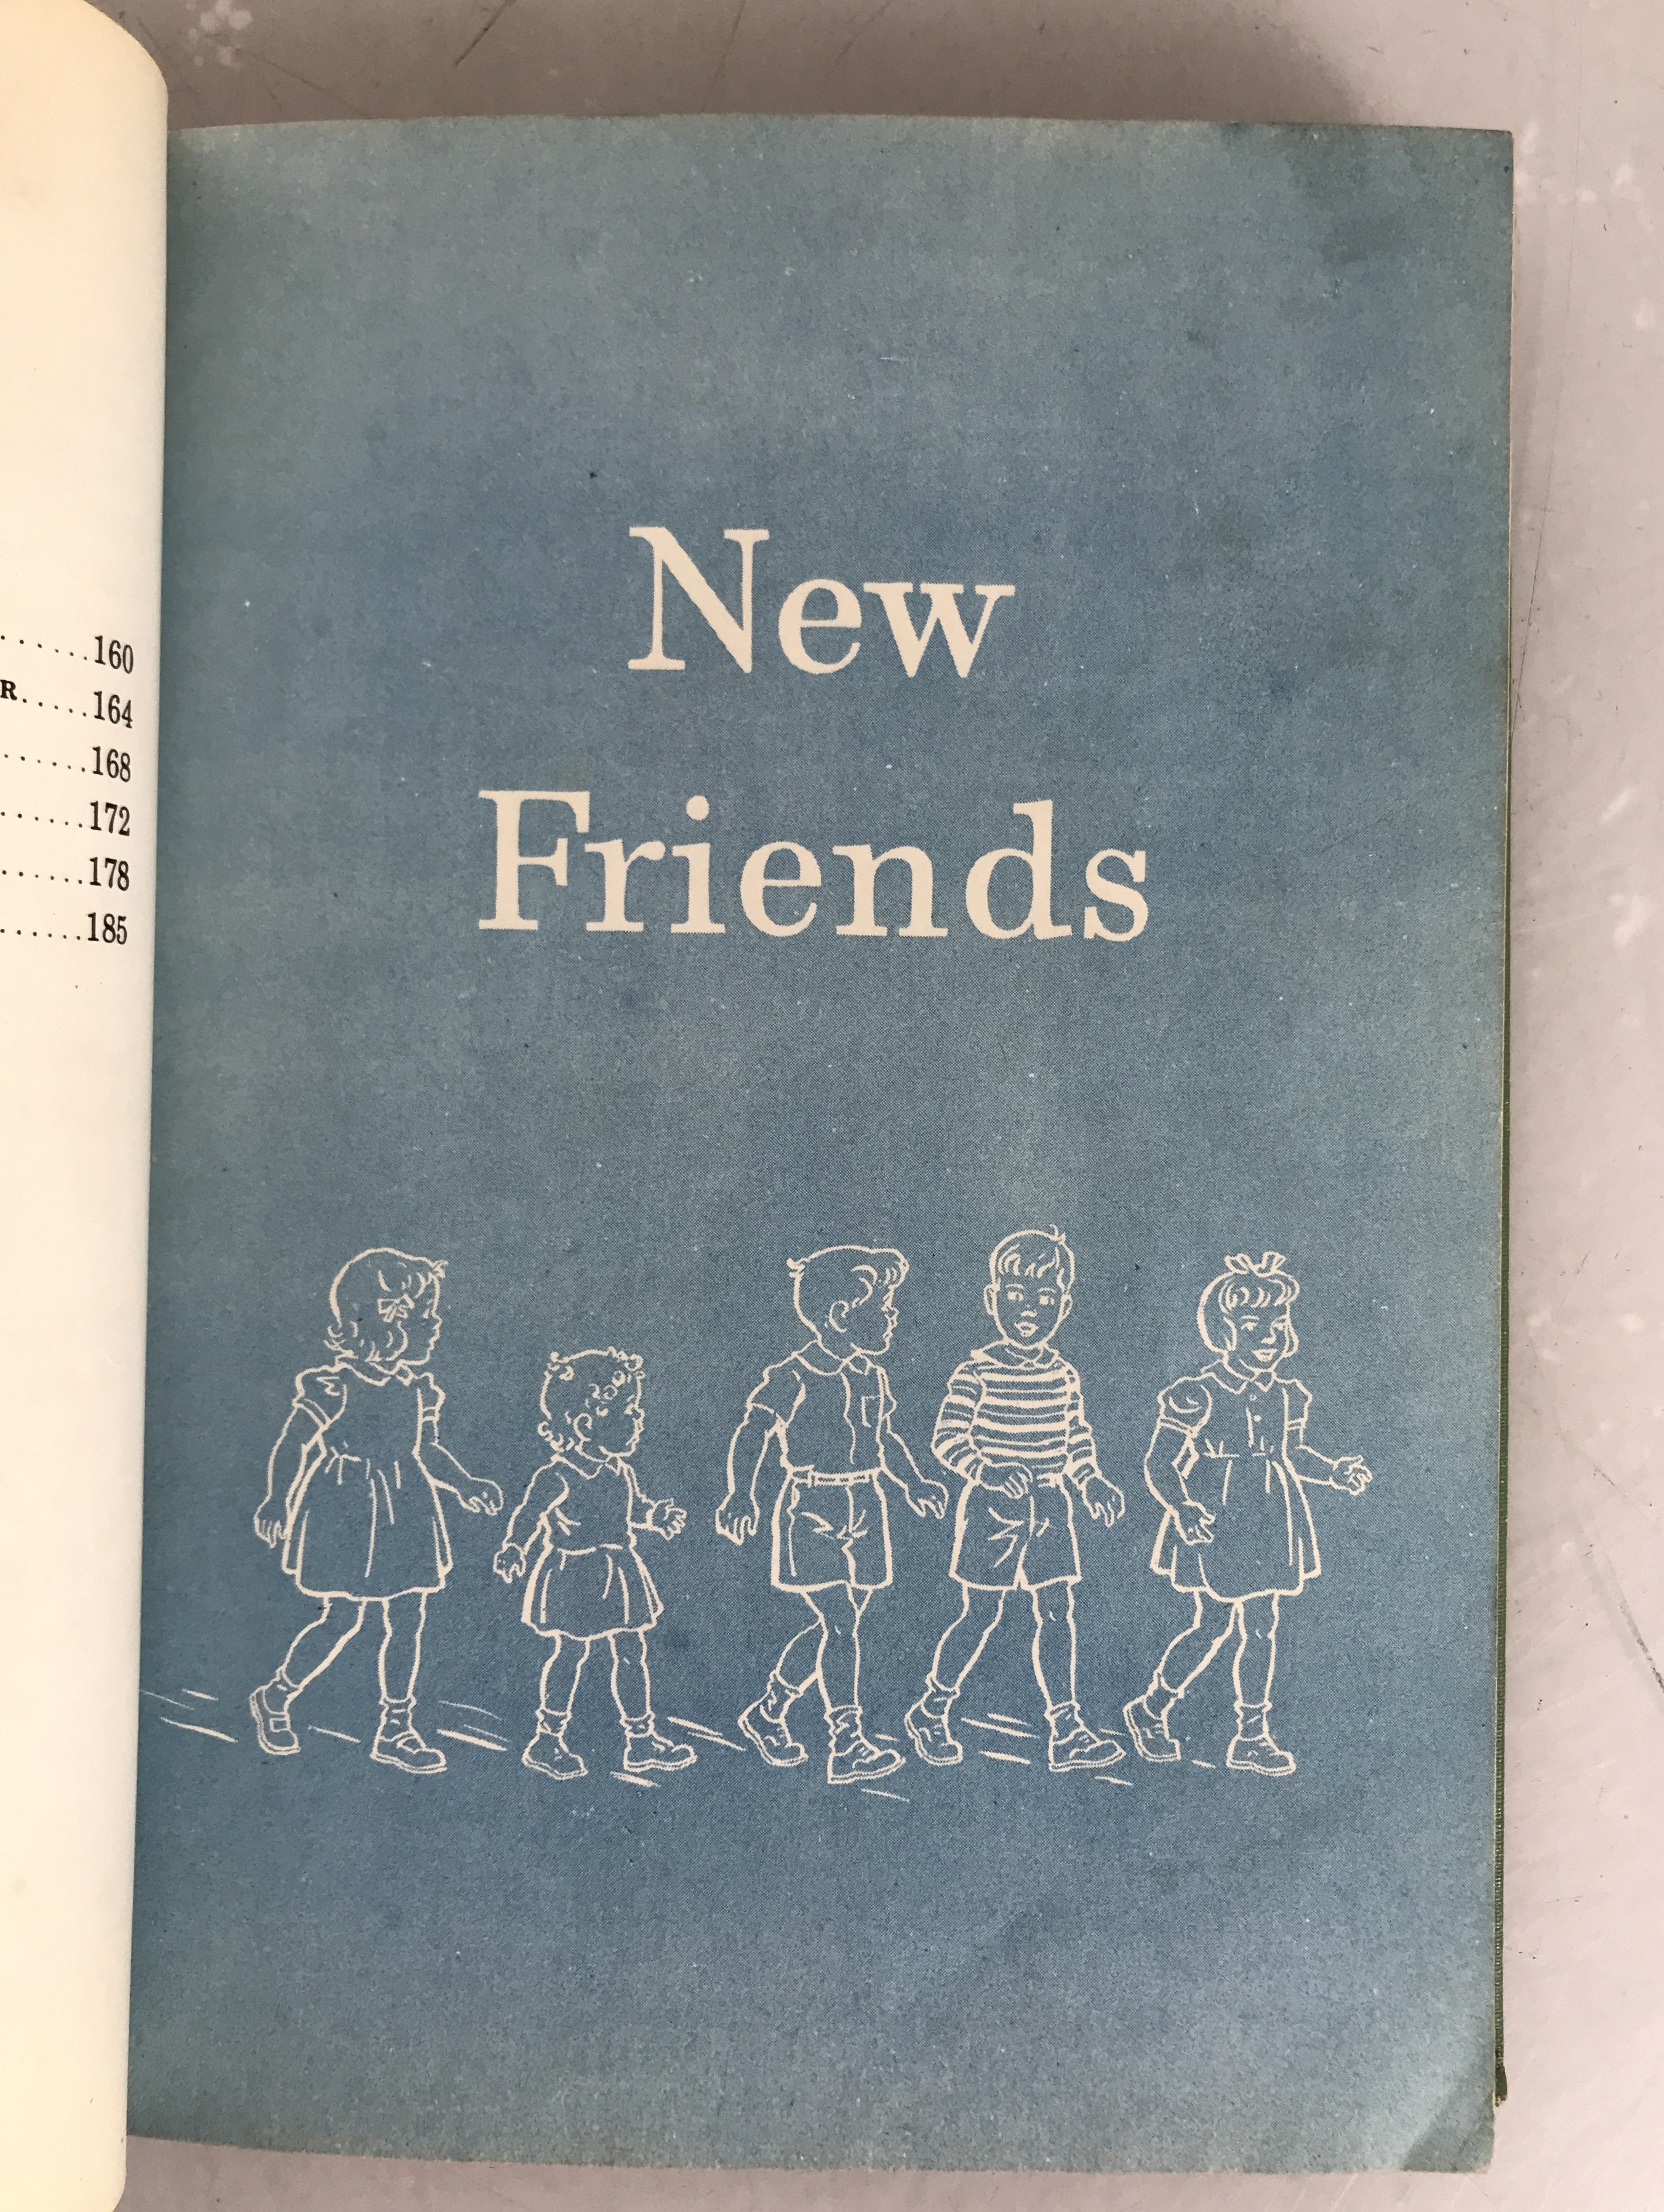 Our New Friends Cathedral Basic Readers John O'Brien 1947 HC